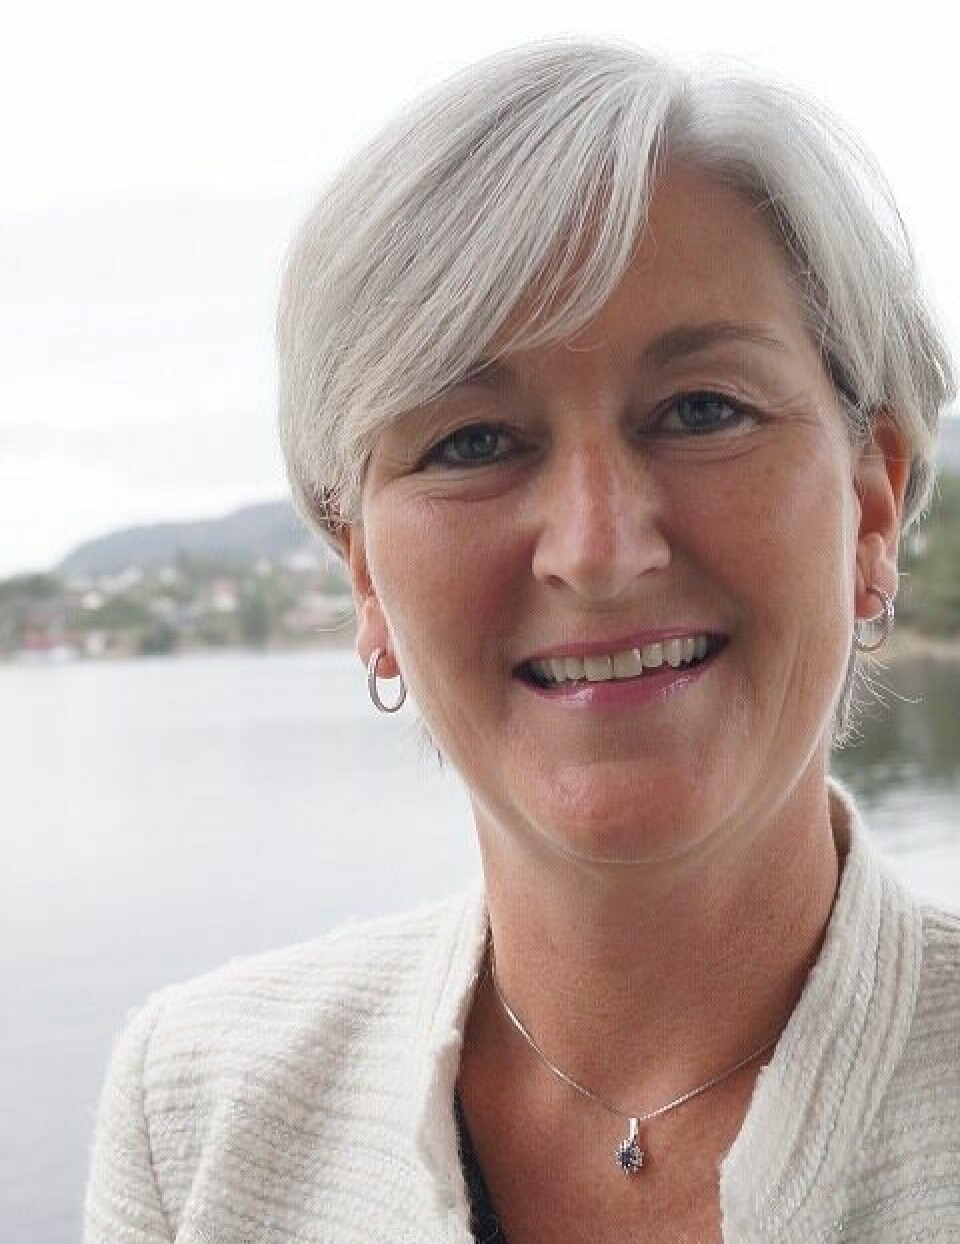 Anne-Kristine Øen: Salmon Group's members 'take moral and ethical responsibility'.